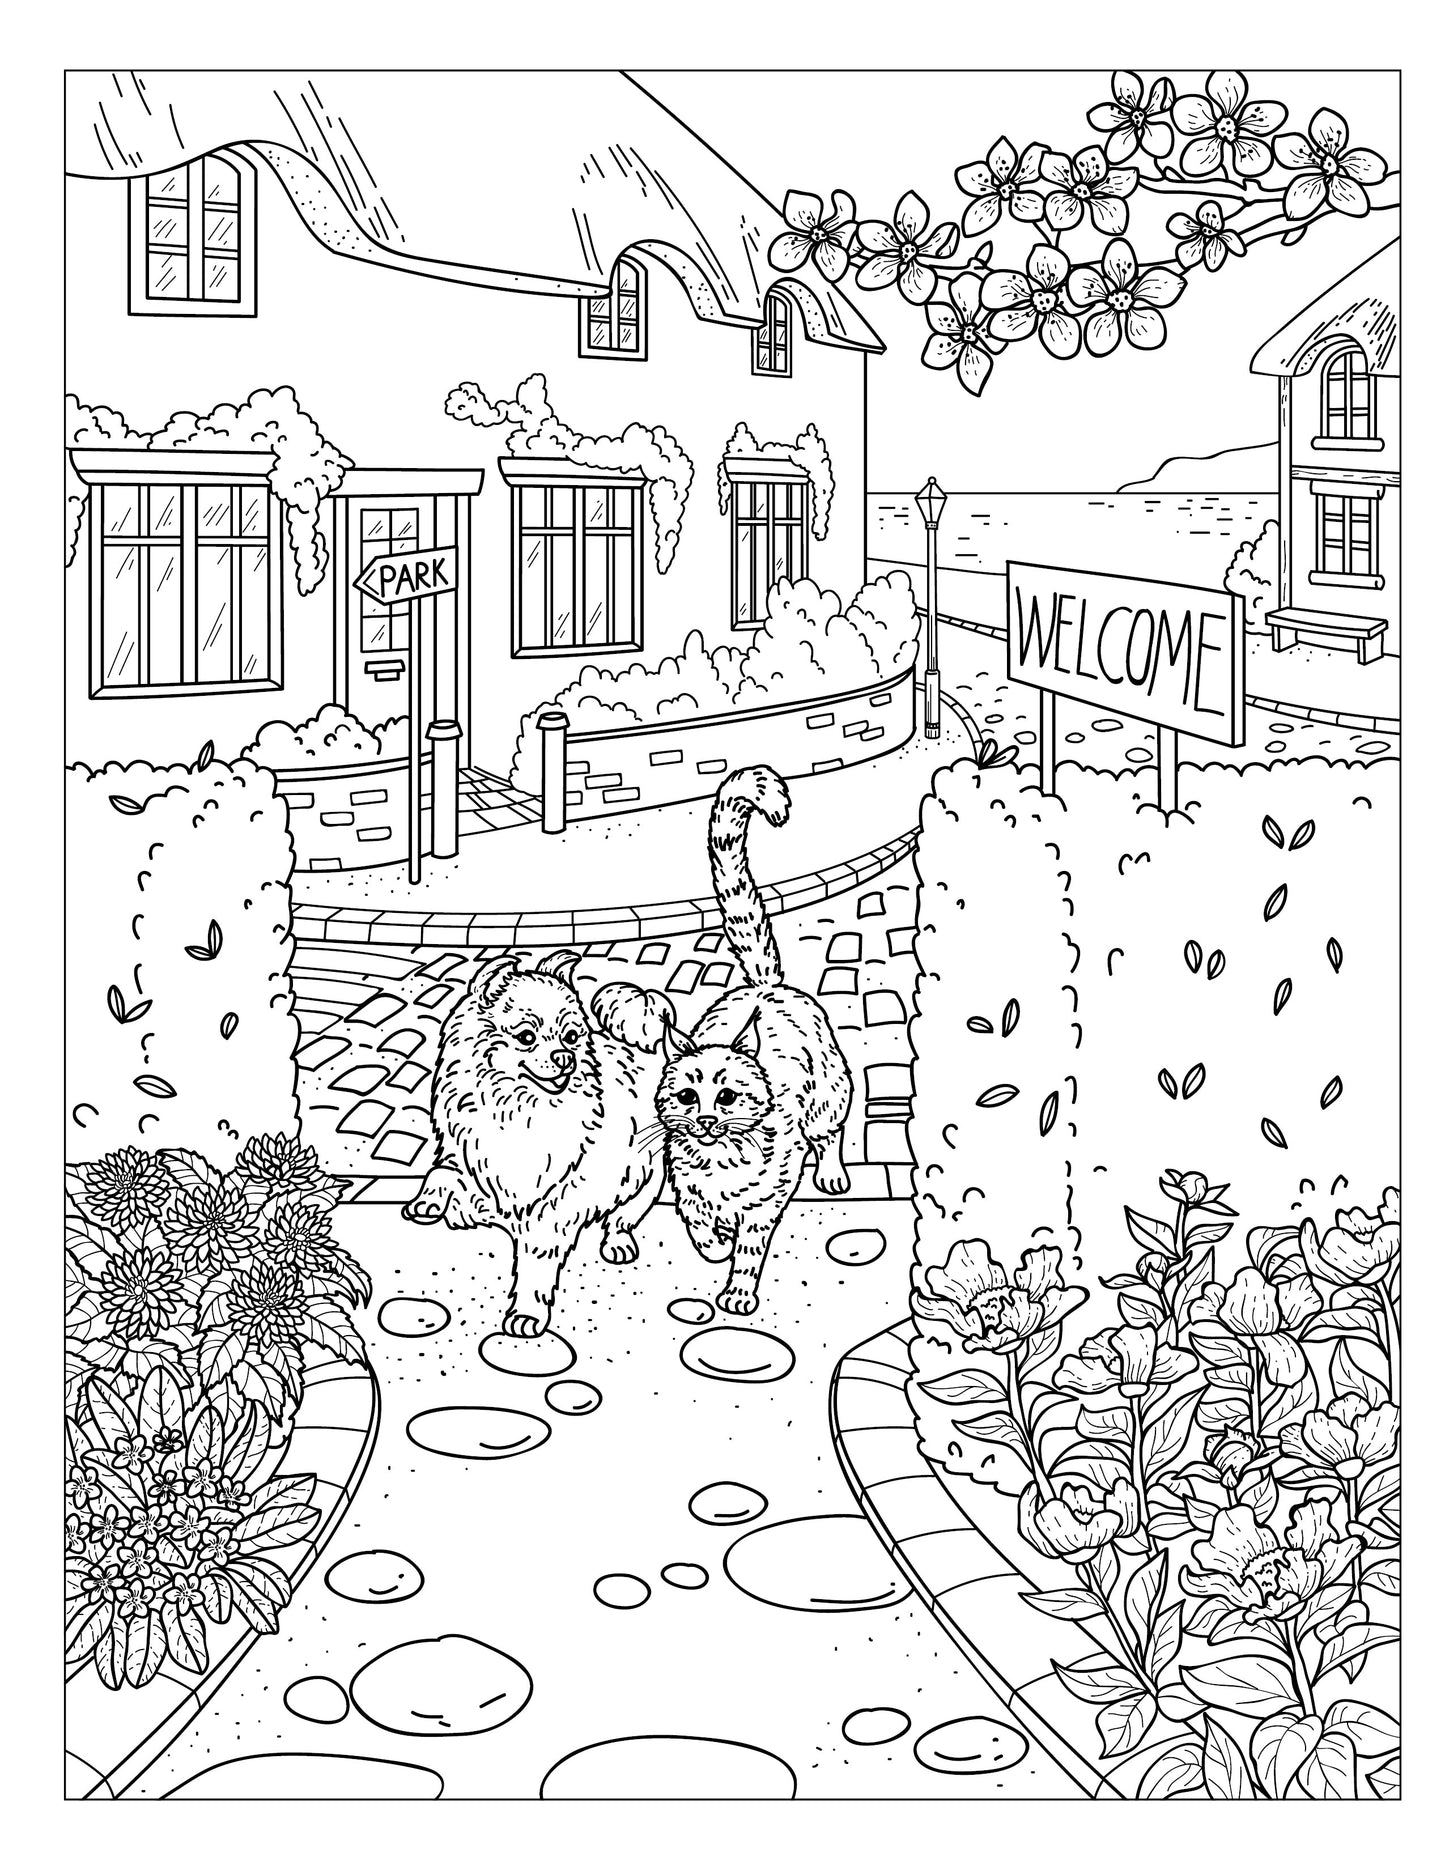 Single Coloring Book Page - Winston & Whiskers, Adventure One - At the Park